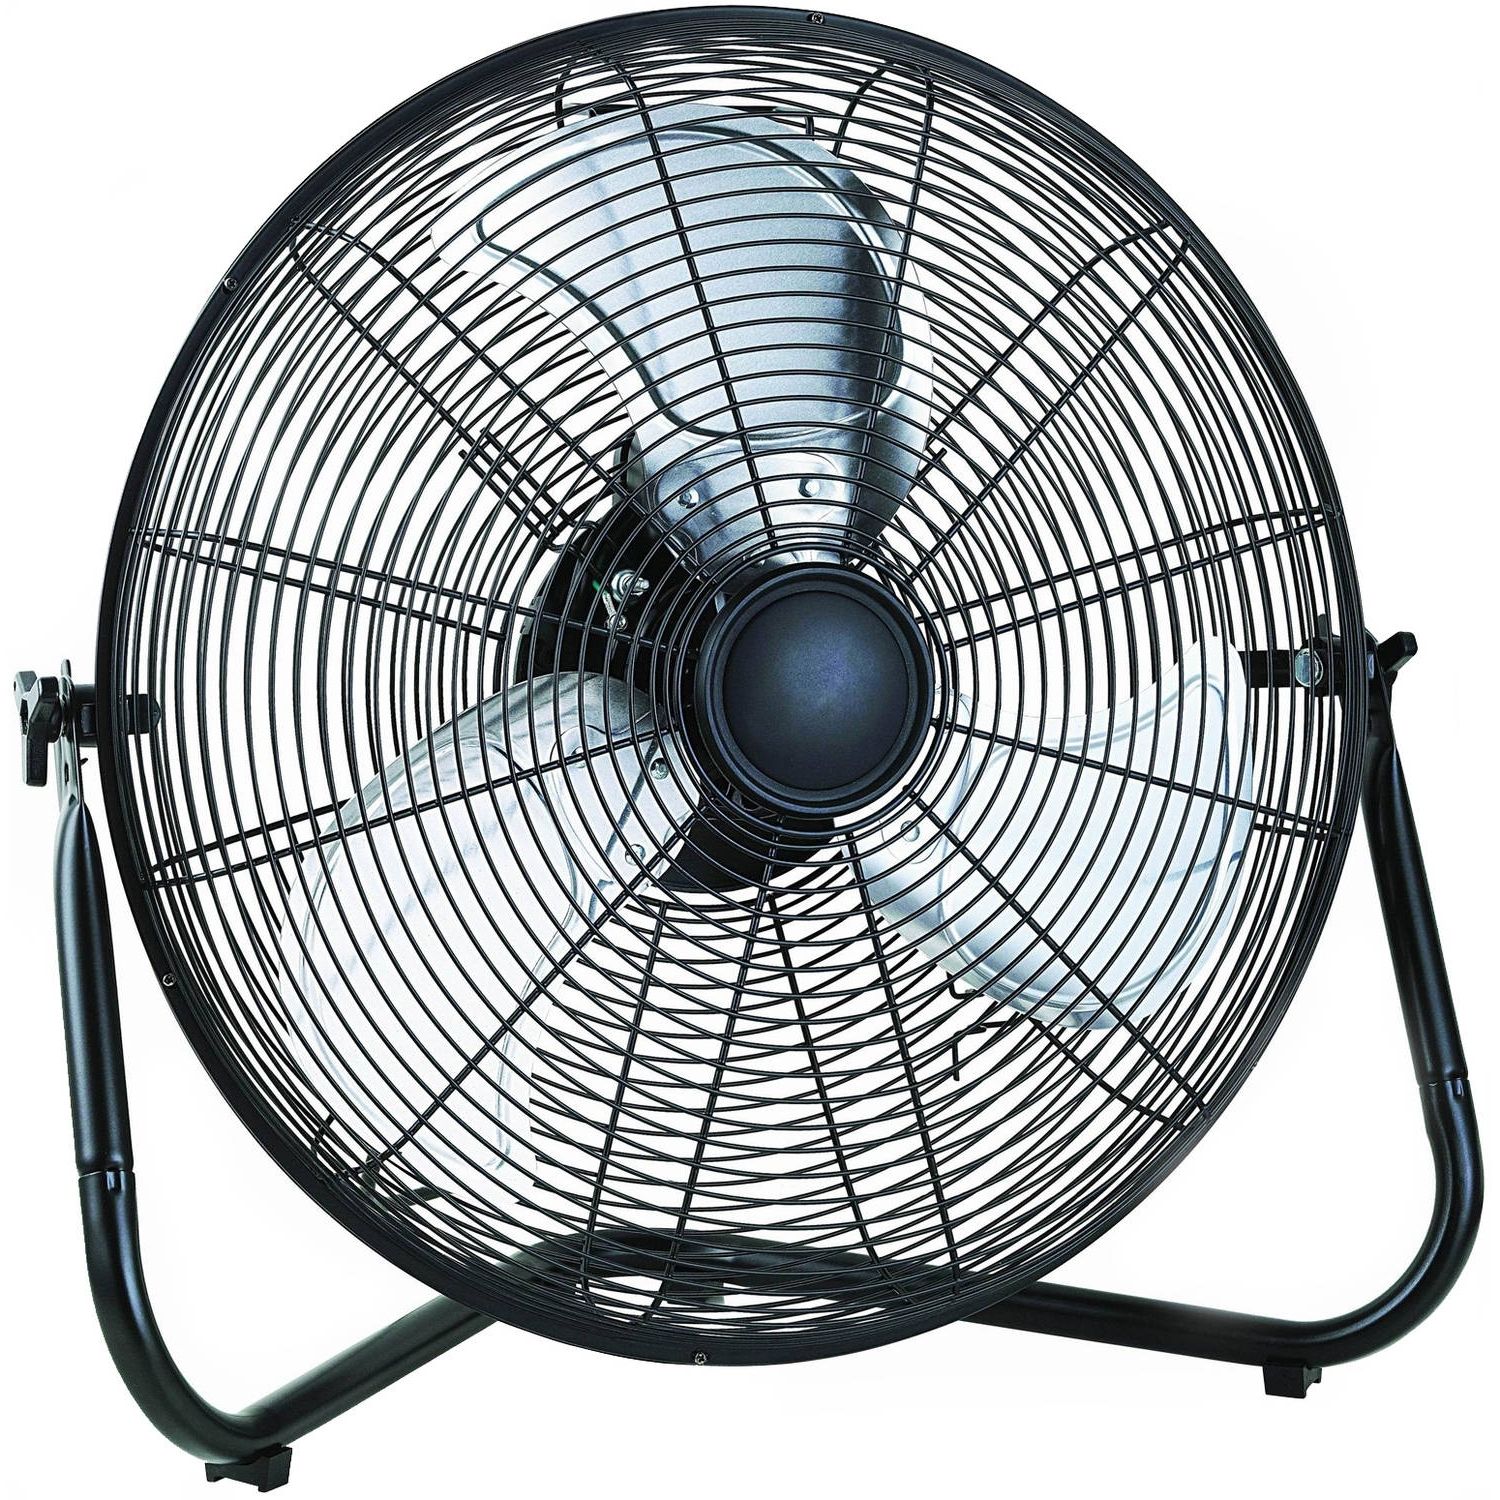 Most Current Outdoor Ceiling Fans At Walmart Intended For Mainstays 20" High Velocity Fan, Black – Walmart (View 3 of 20)